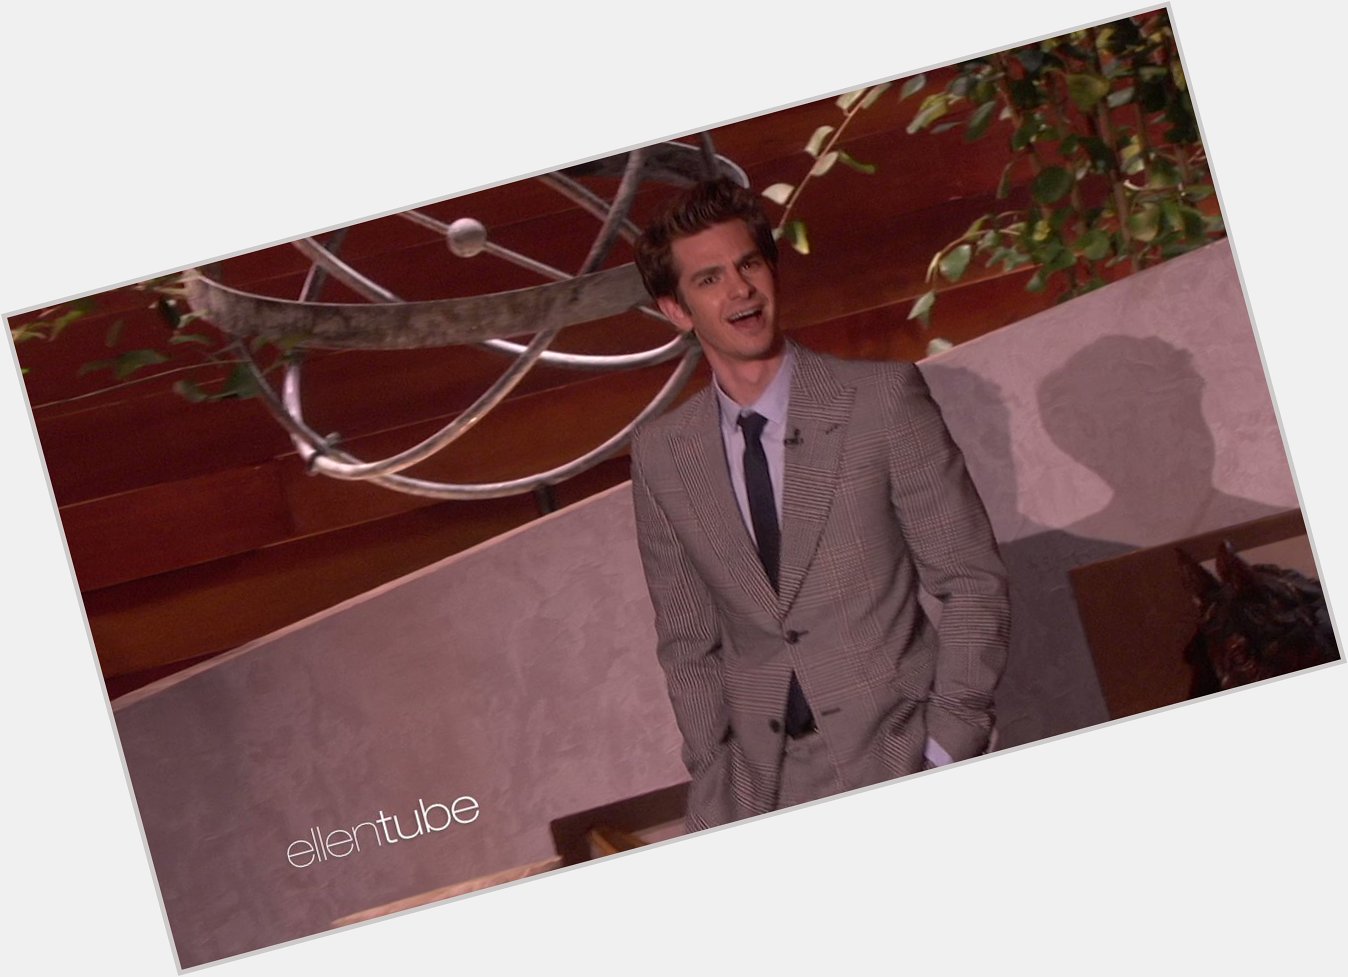 Happy birthday Andrew Garfield! I hope the people around you are as good at surprises as you are. 